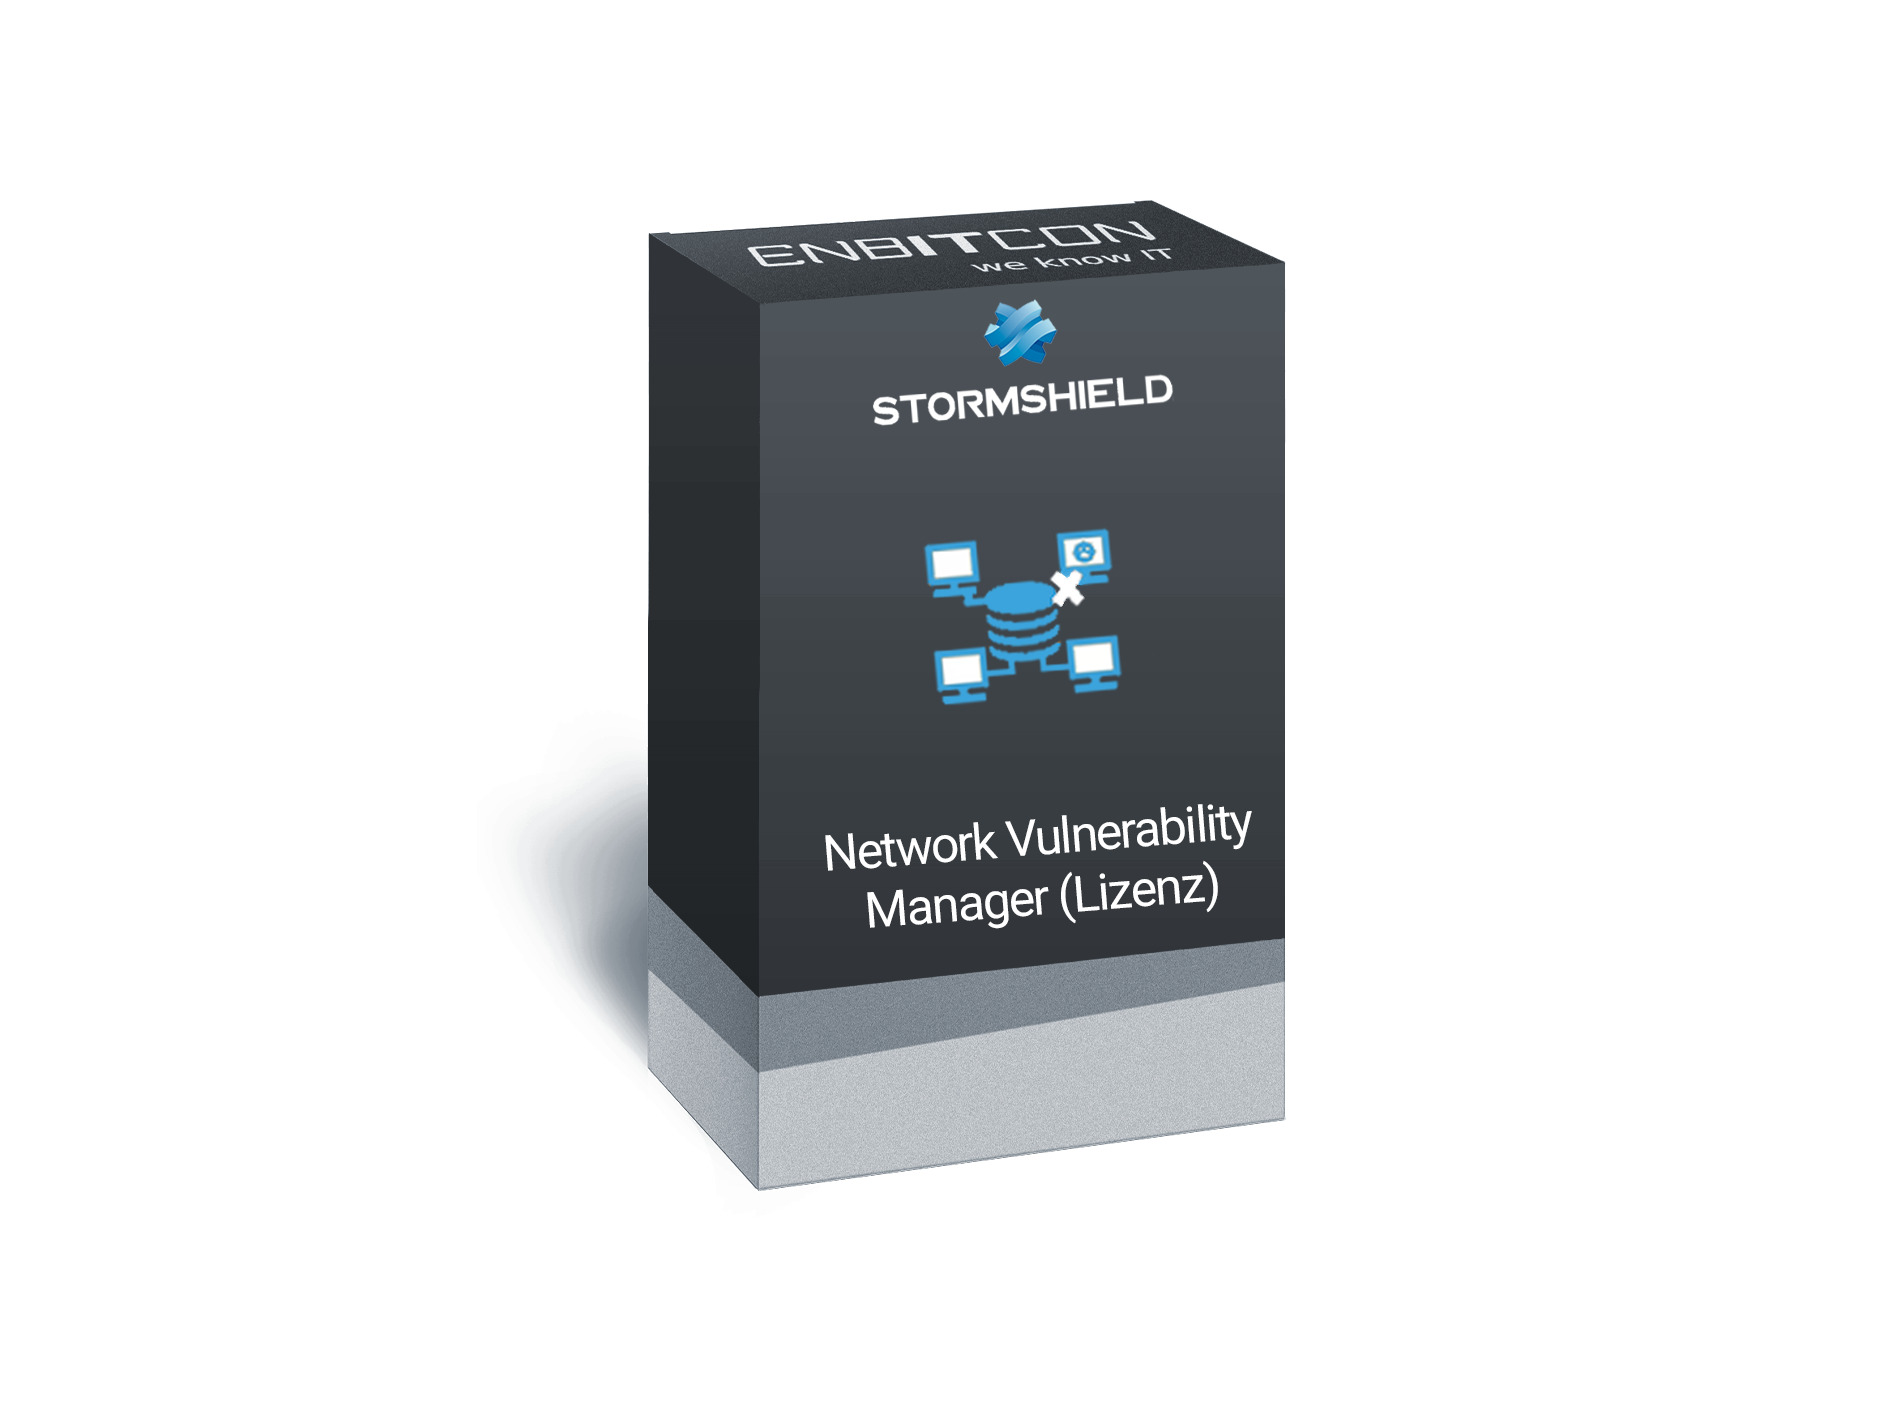 Stormshield SN2100 Network Vulnerability Manager option